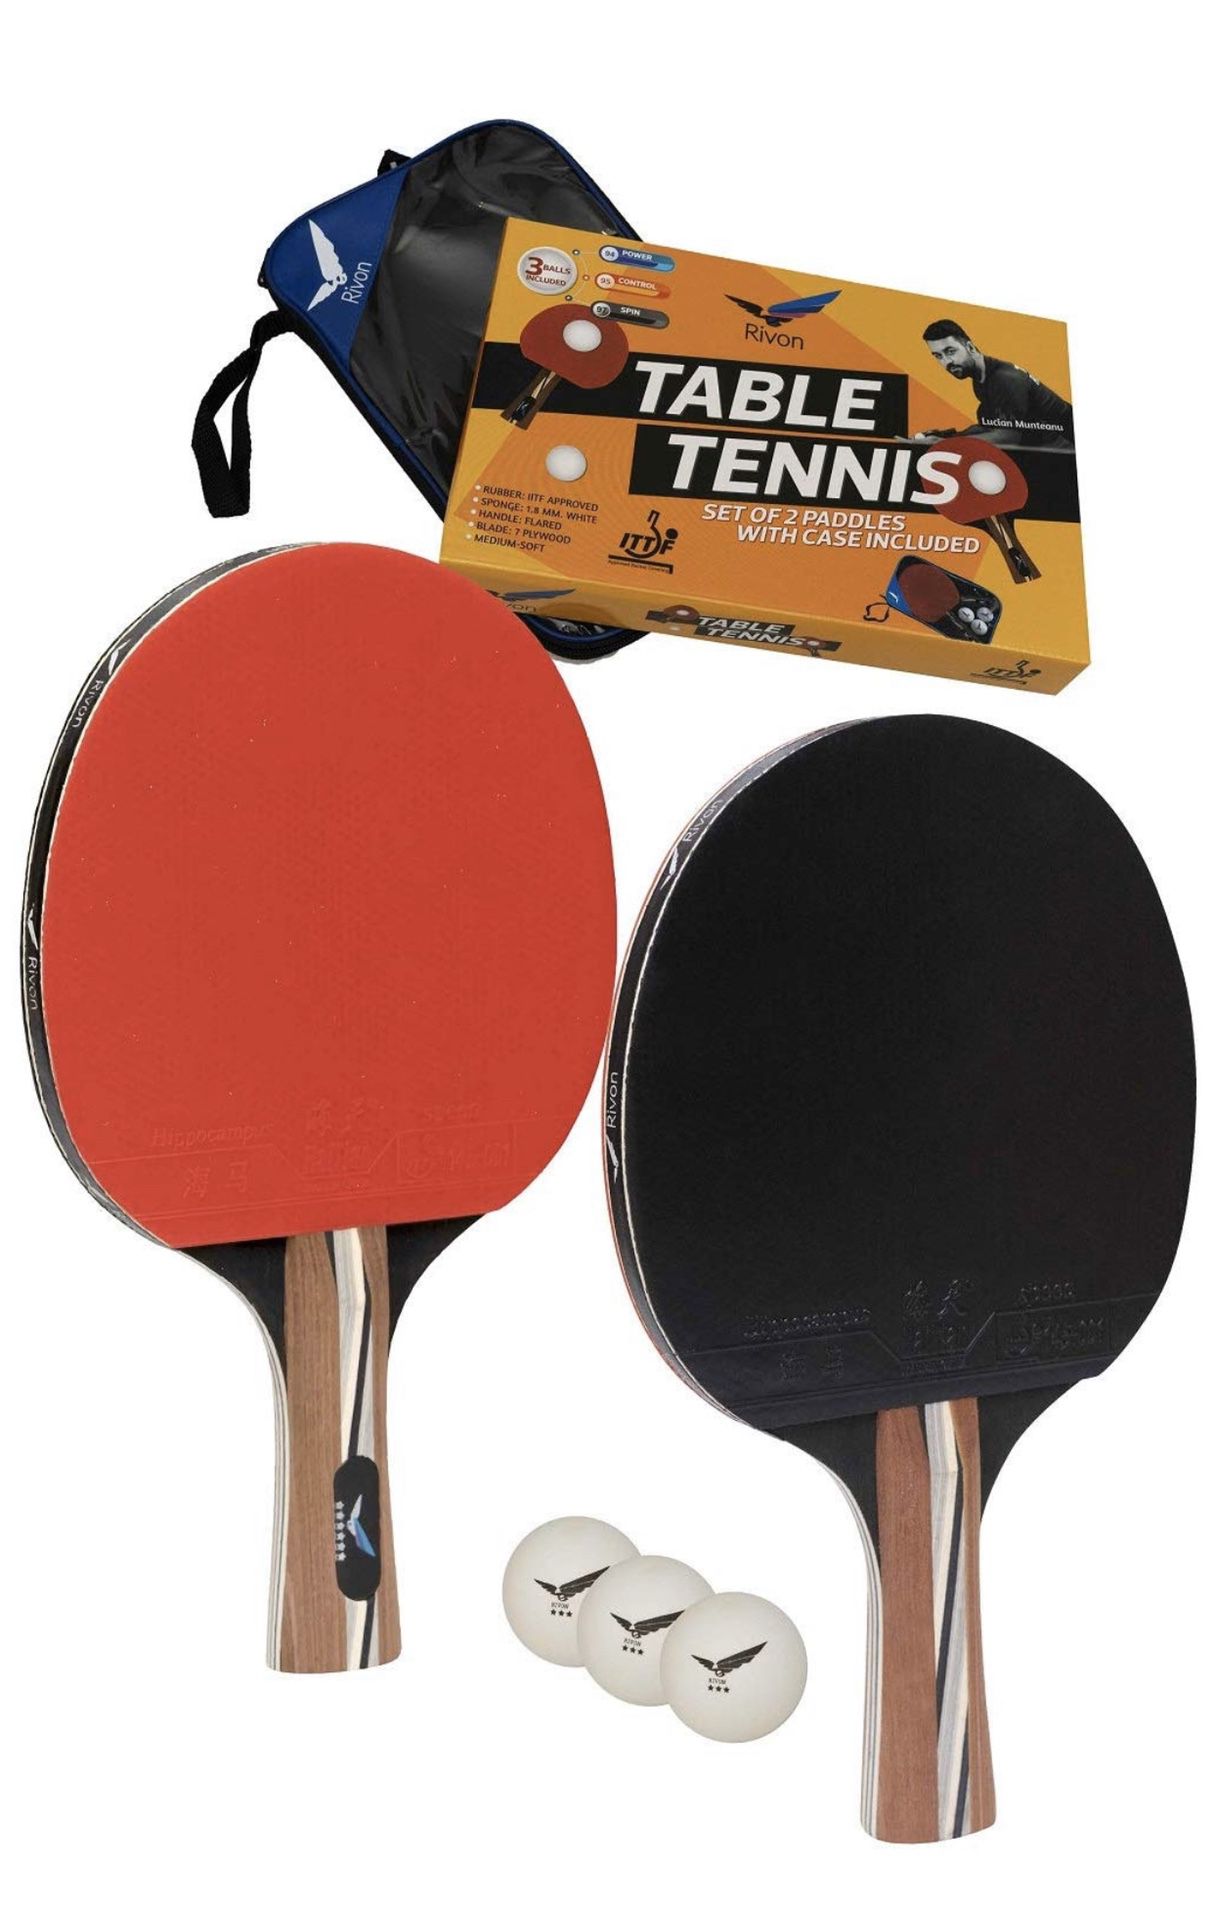 Ping Pong Racket Set - 2 Paddles with 3 Balls and Travel Case - BRAND NEW